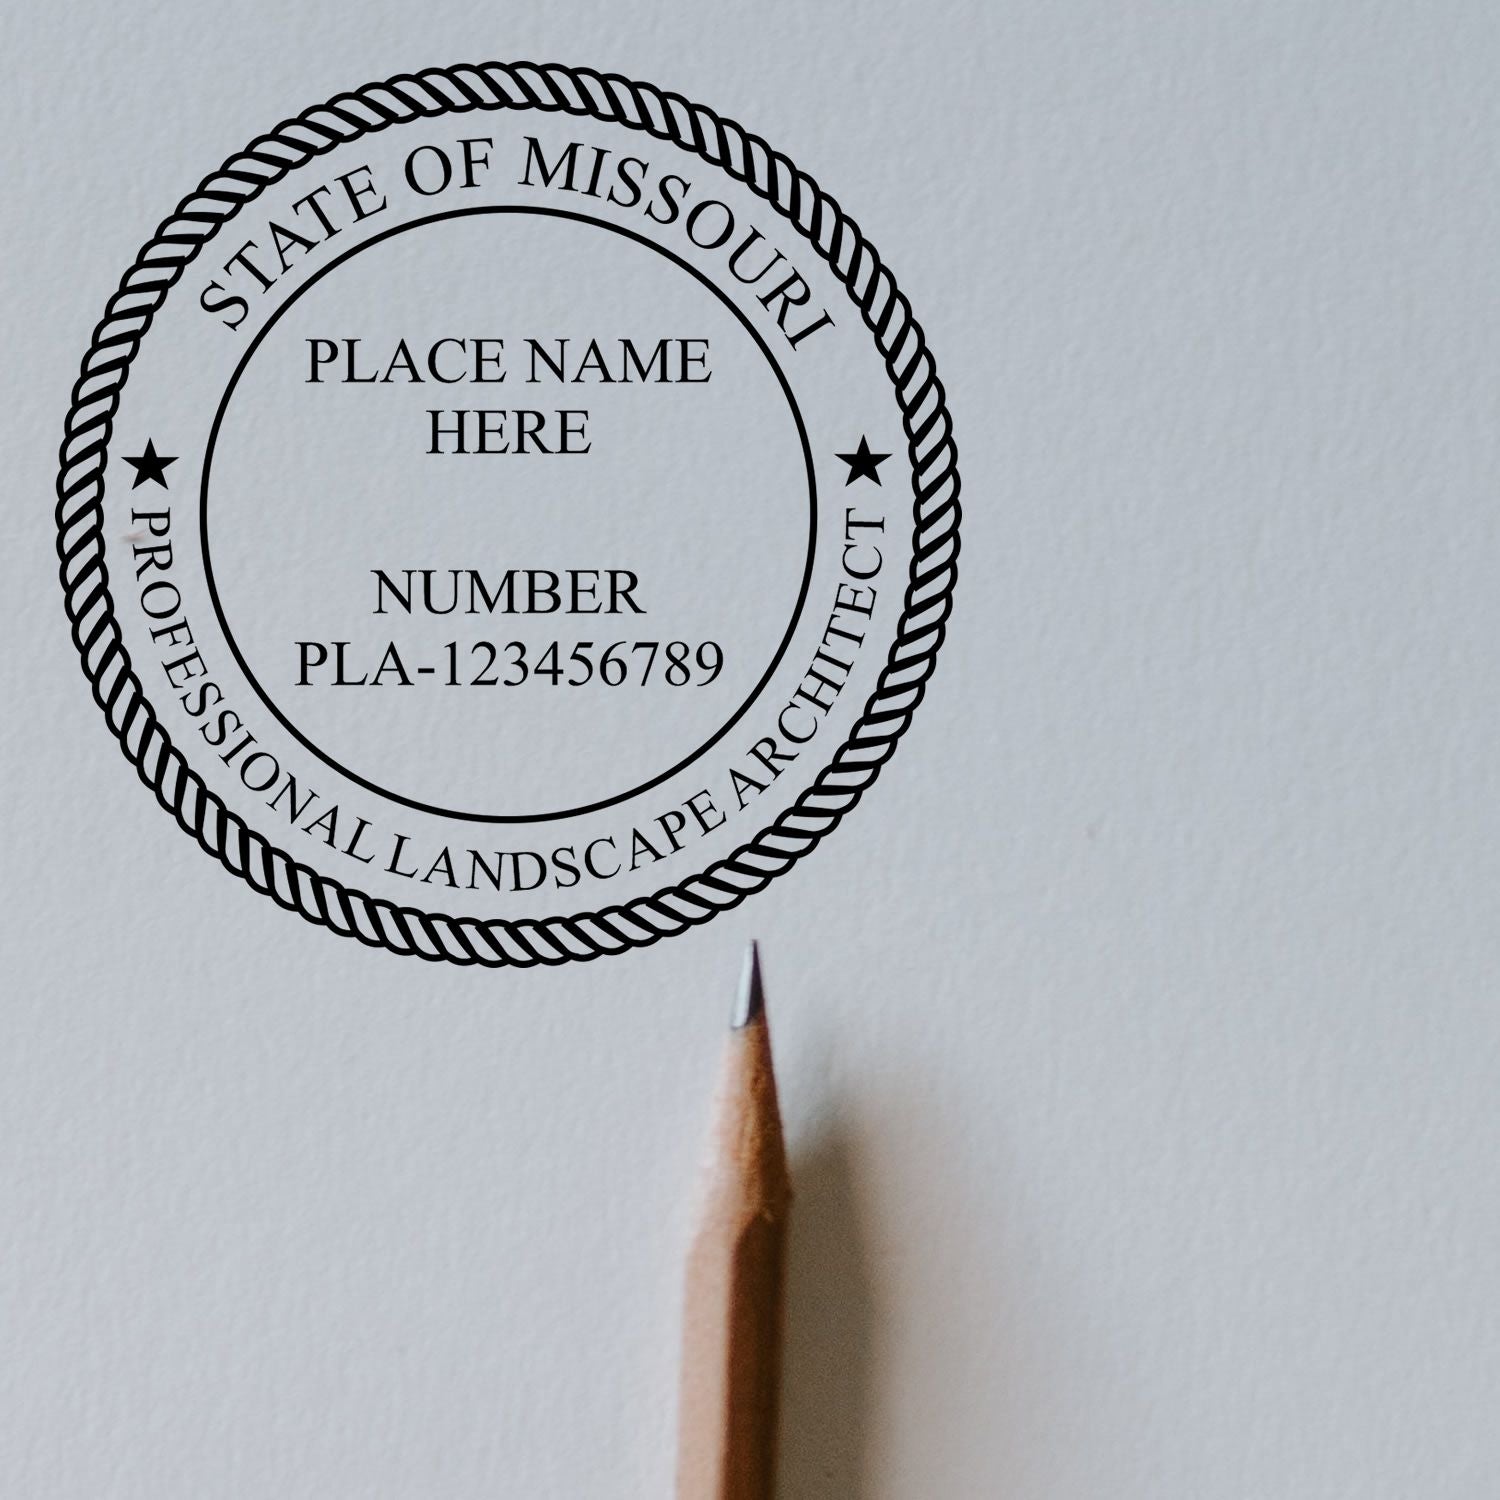 The main image for the Digital Missouri Landscape Architect Stamp depicting a sample of the imprint and electronic files